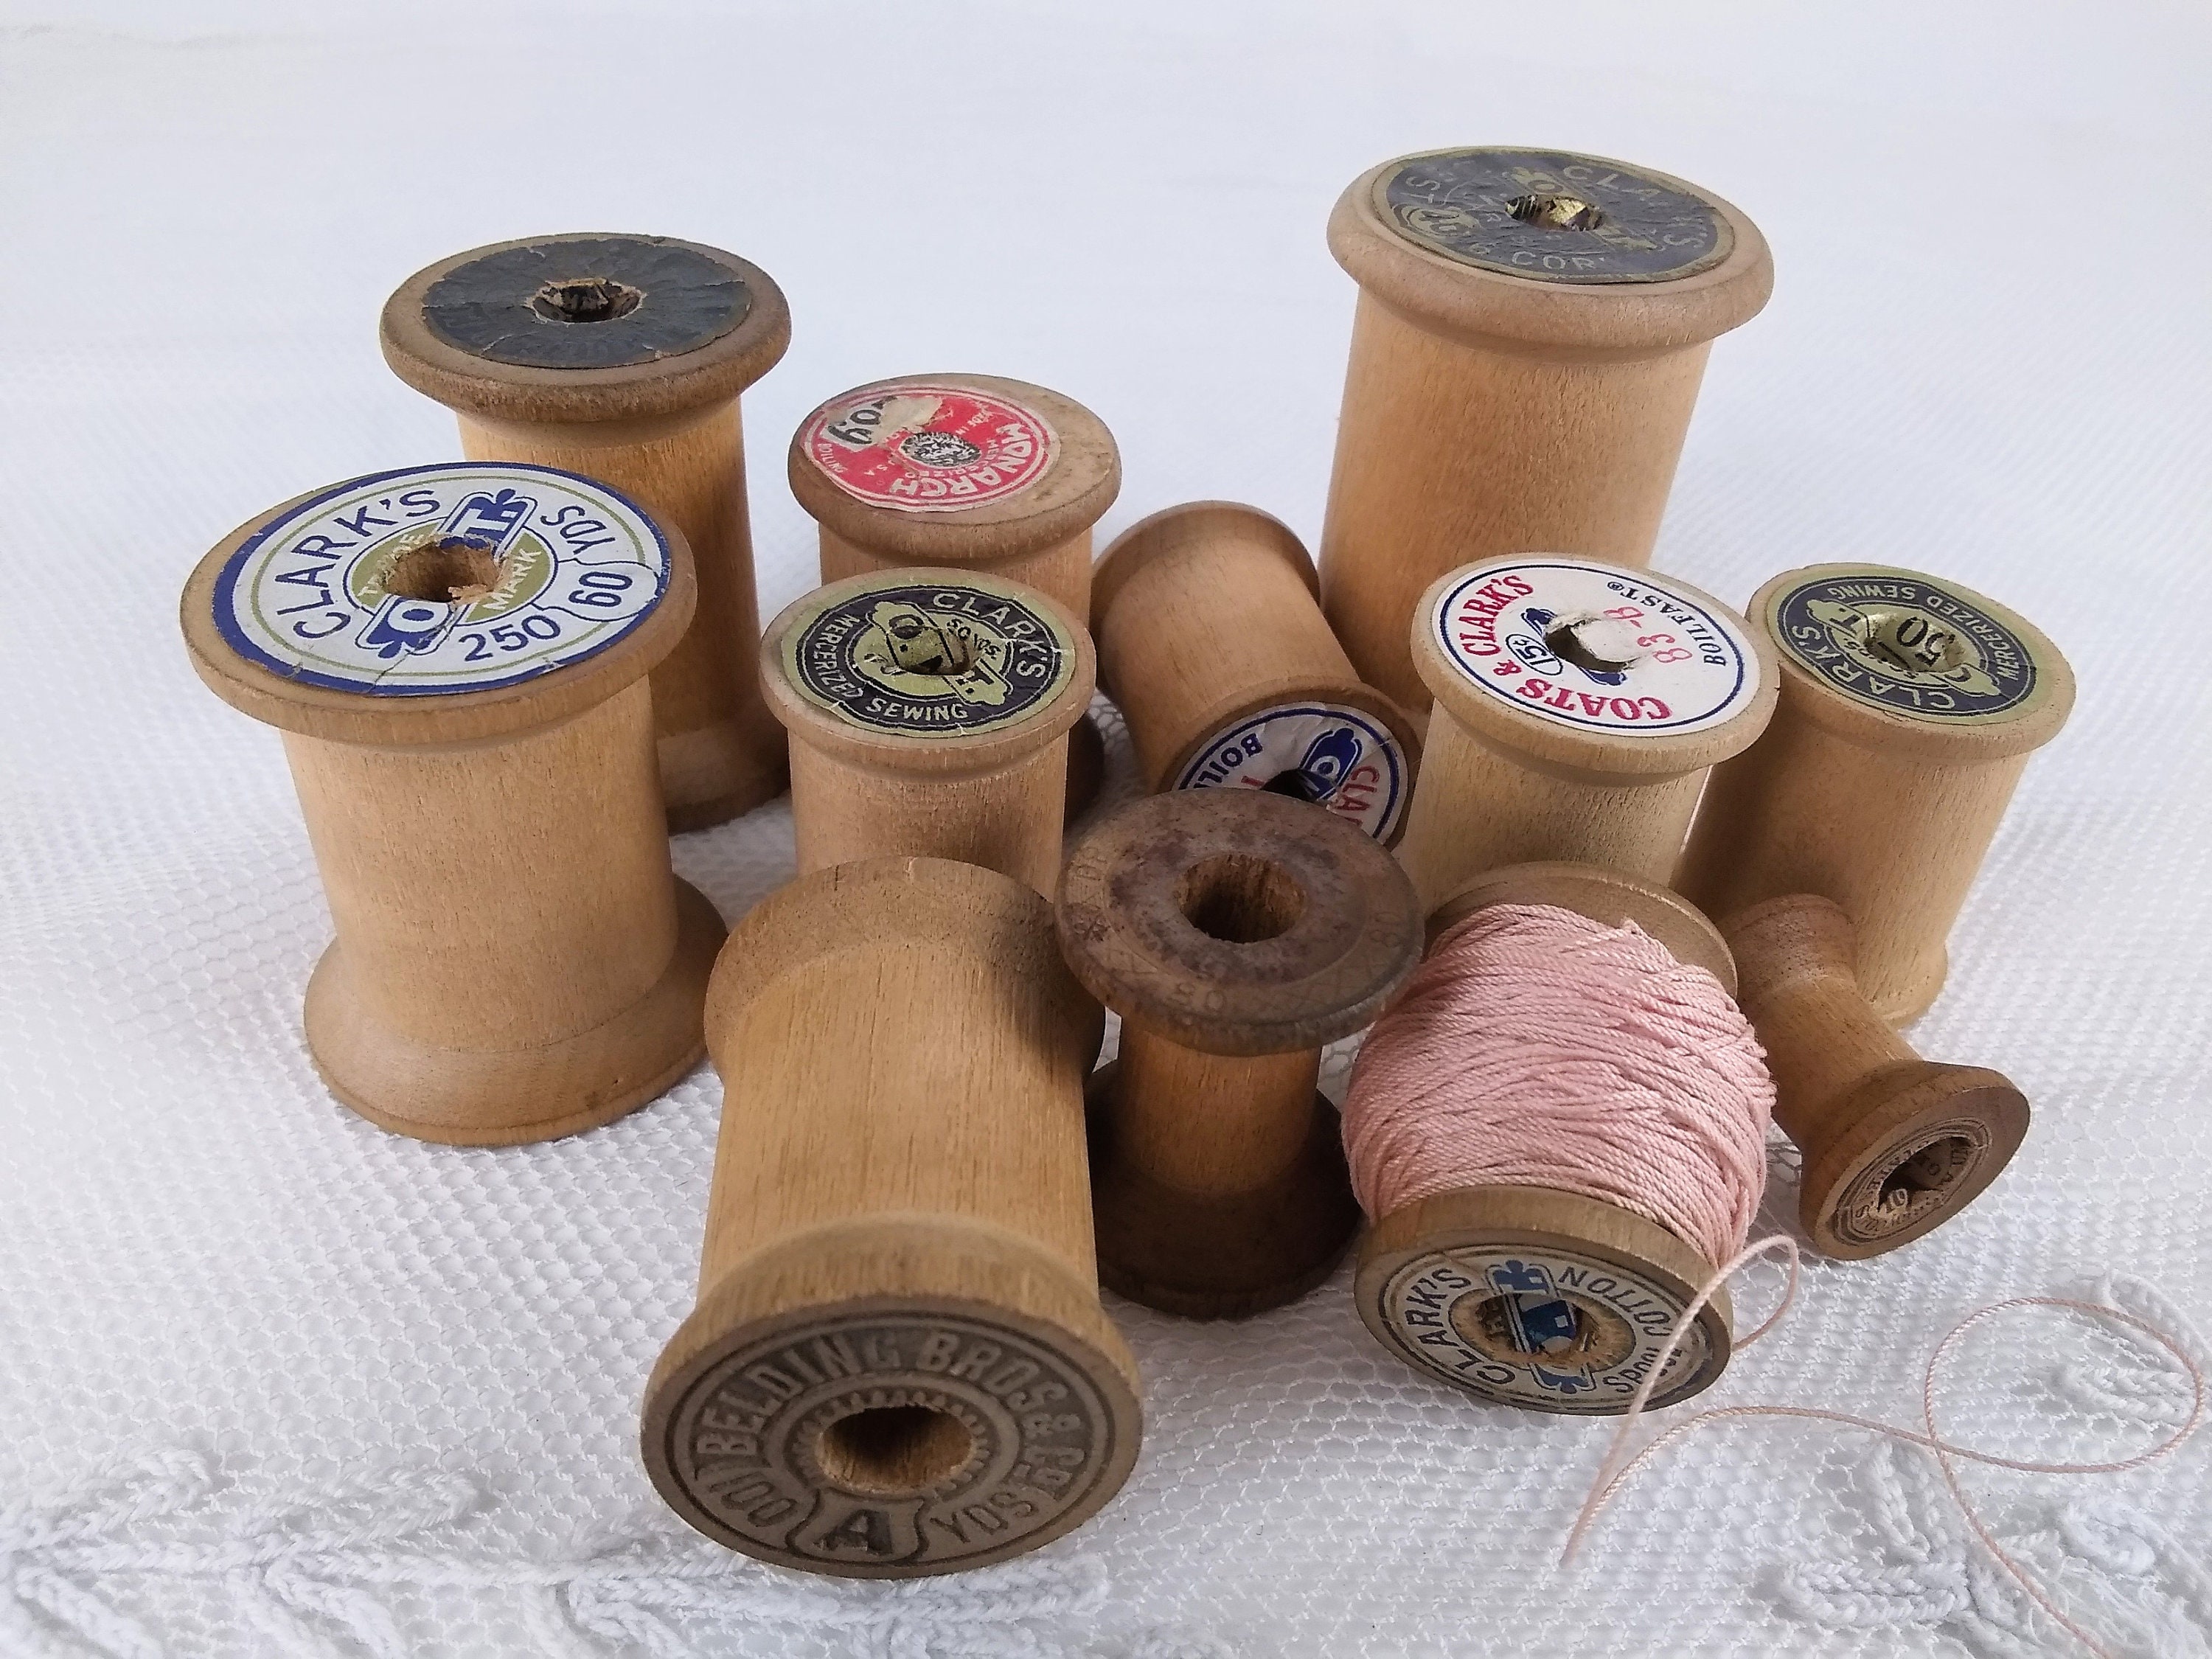 2Pcs Vintage Wooden Spools DIY Reels Organizer for Sewing Ribbons Twine  Wood Crafts Tools Thread Wire